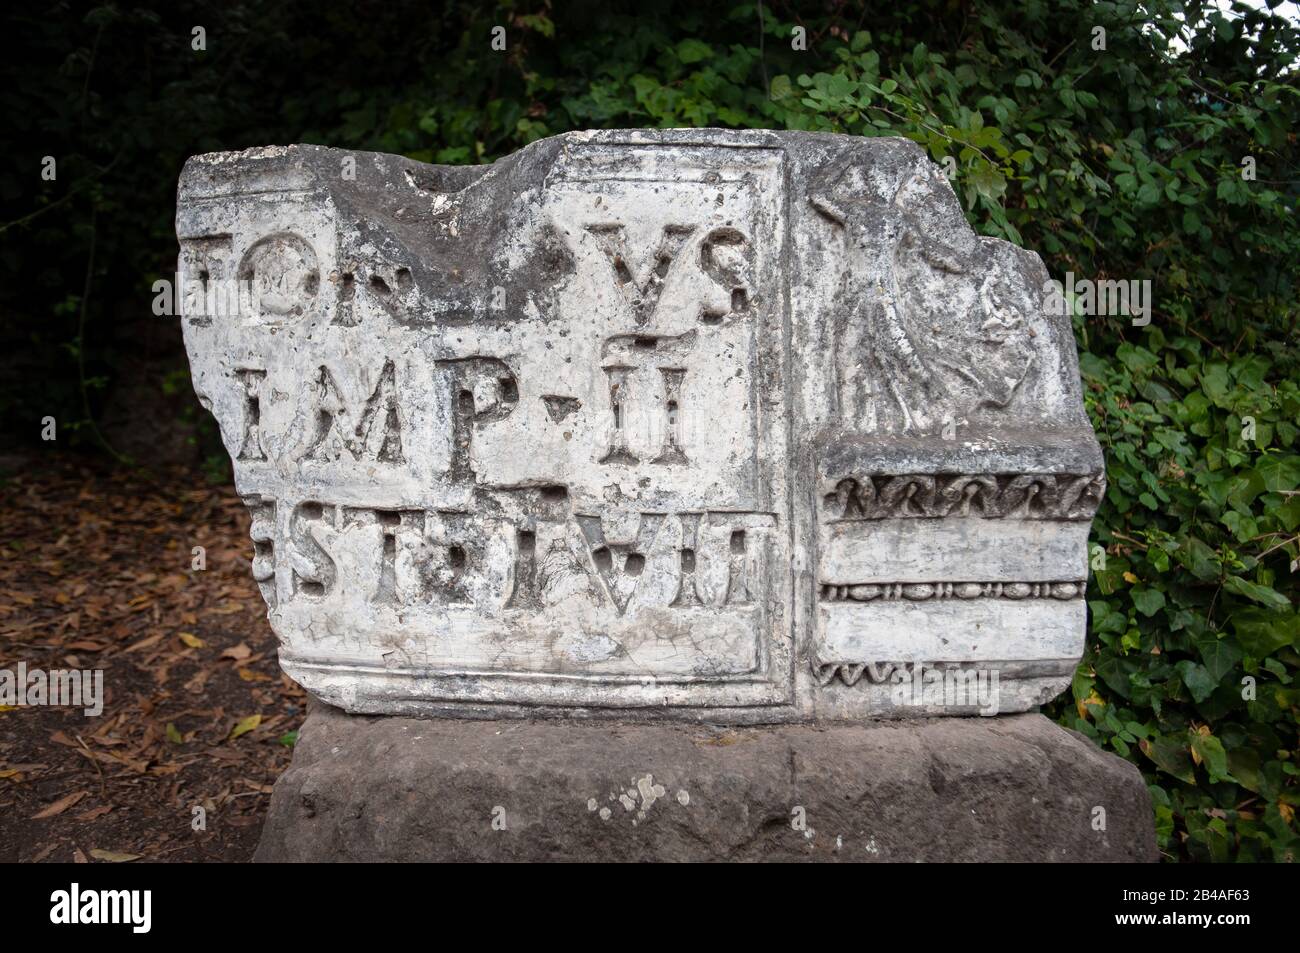 Broken marble stone with latin inscription on display at the Forum, Rome Stock Photo